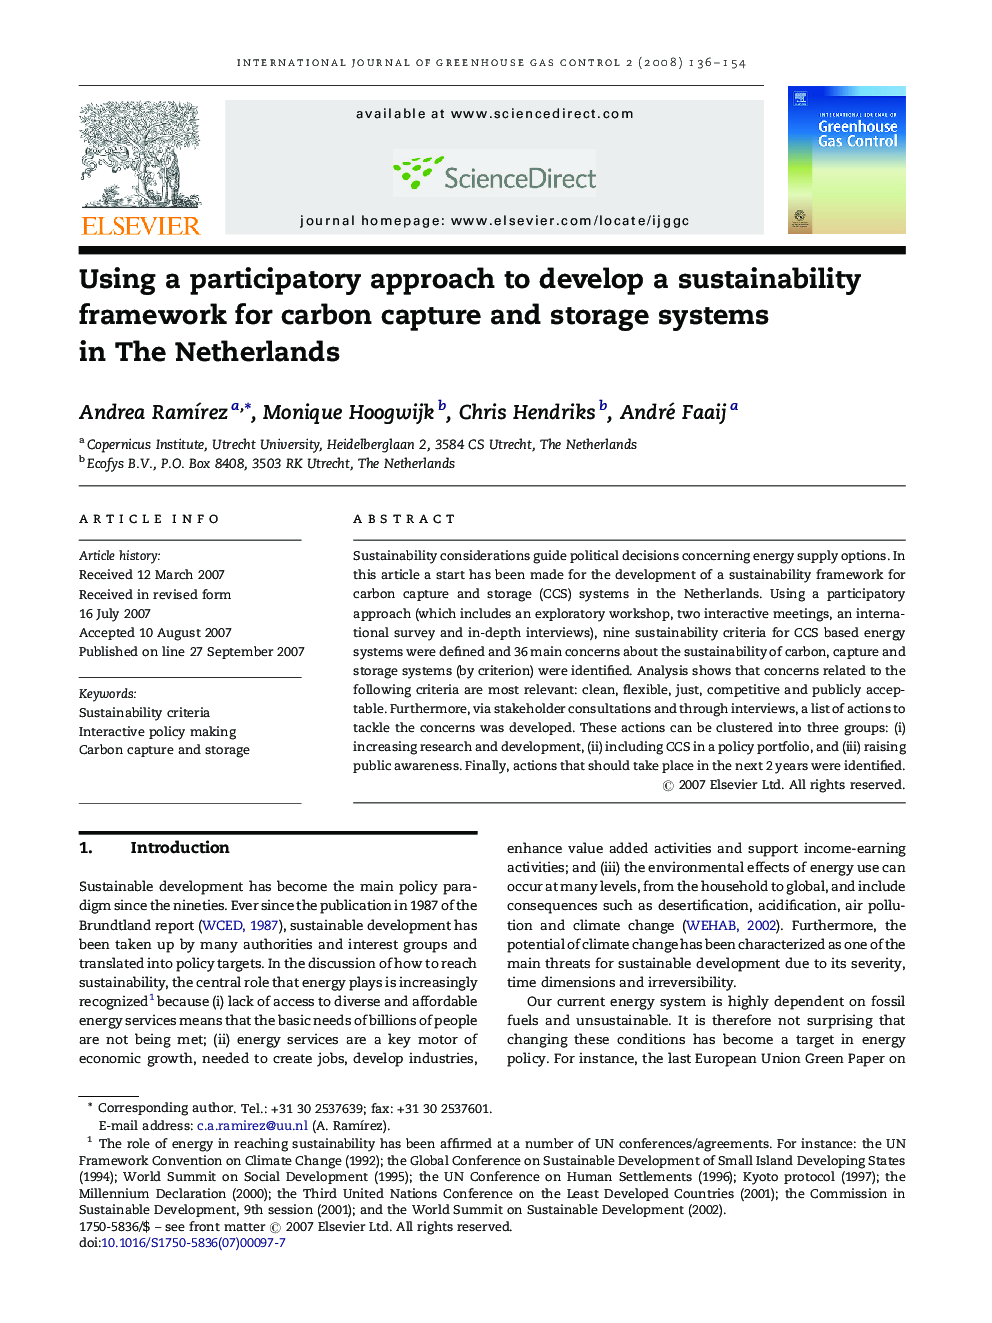 Using a participatory approach to develop a sustainability framework for carbon capture and storage systems in The Netherlands